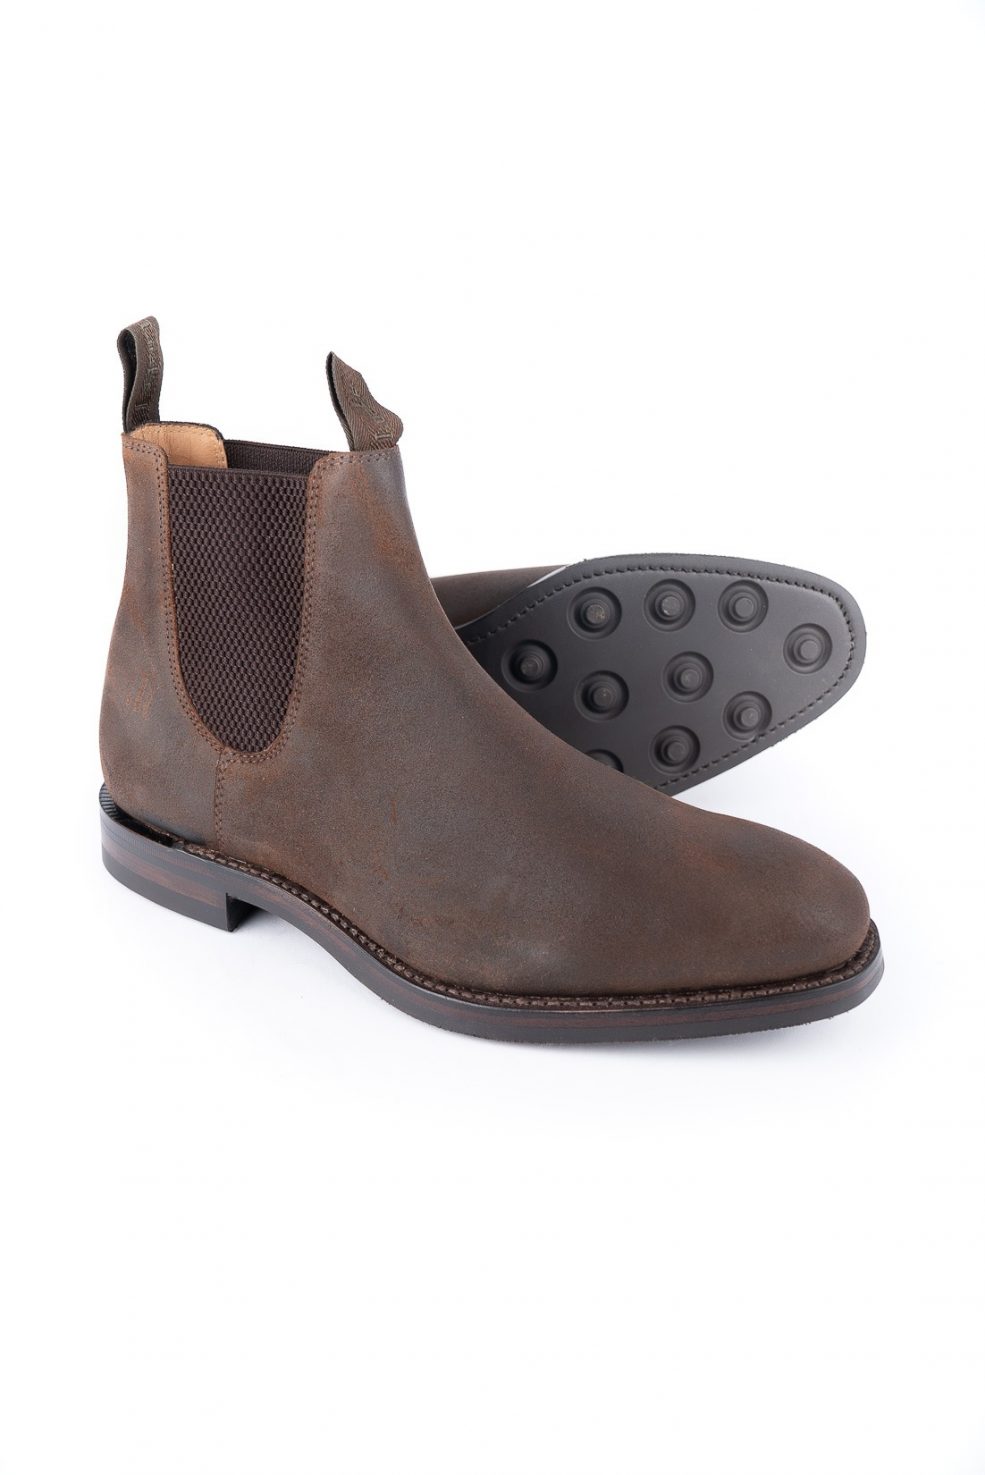 loake chelsea boots suede